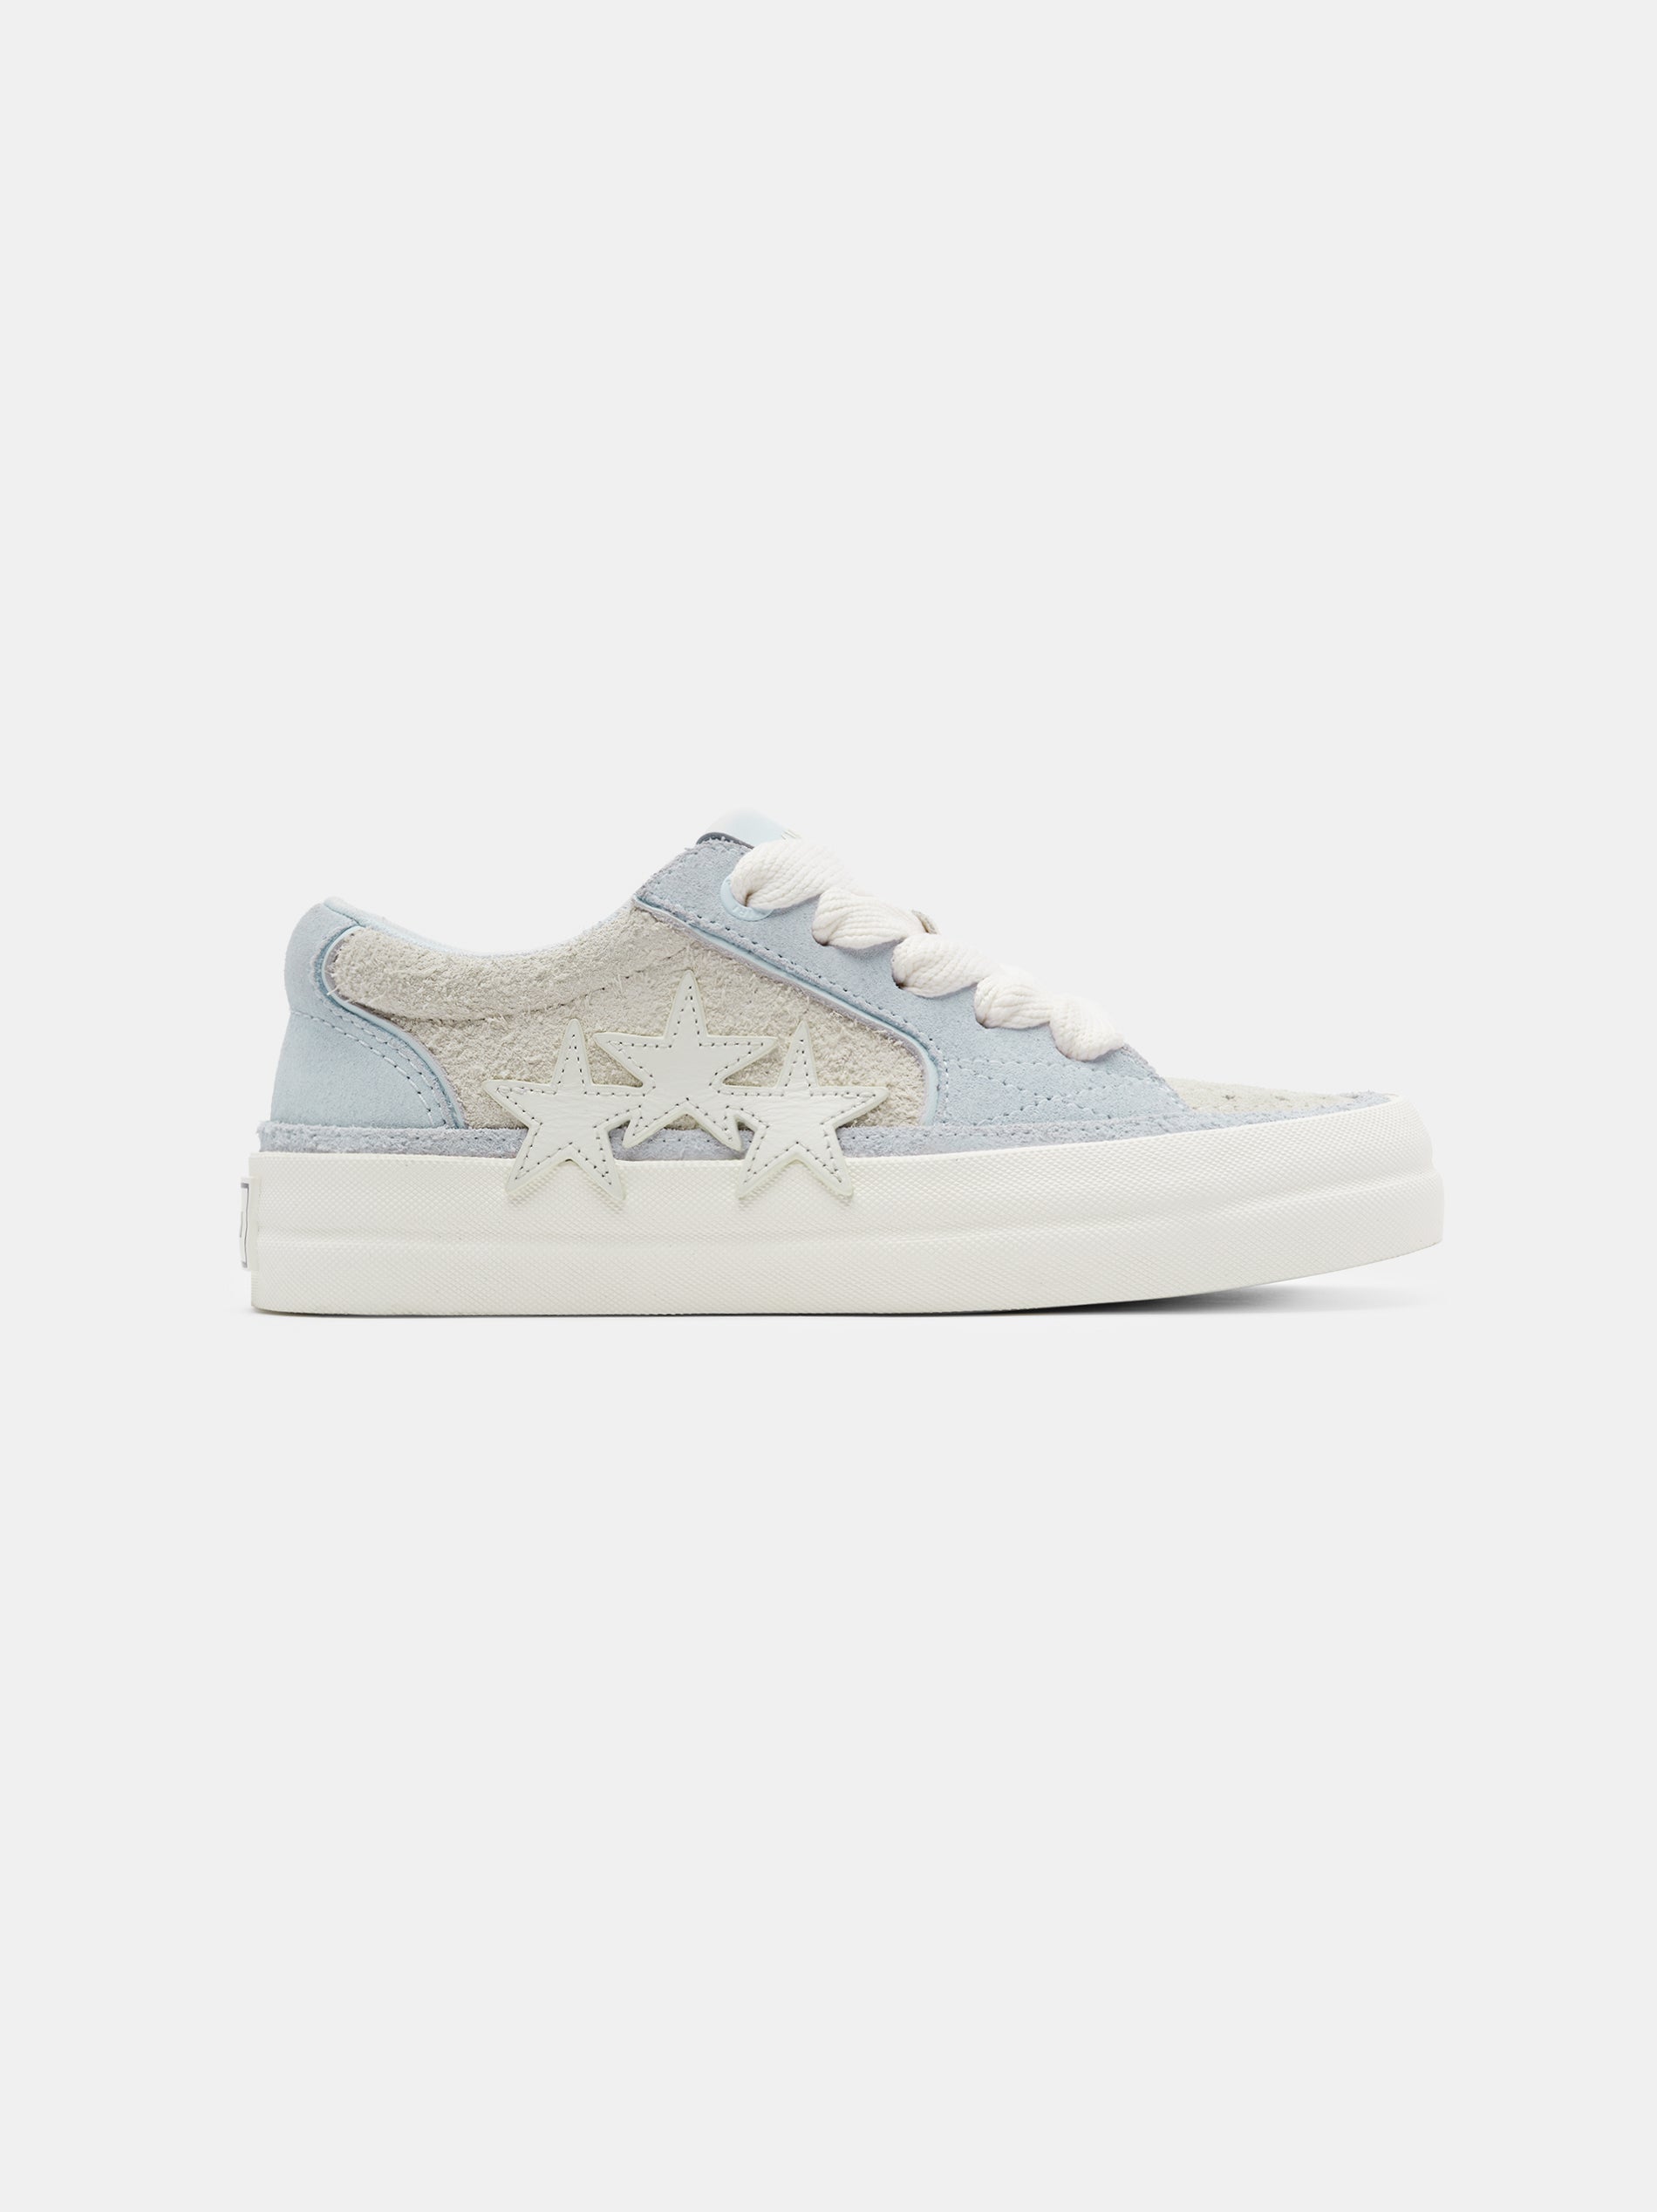 Product WOMEN - WOMEN'S SUNSET SKATE LOW - Alabaster Blue featured image